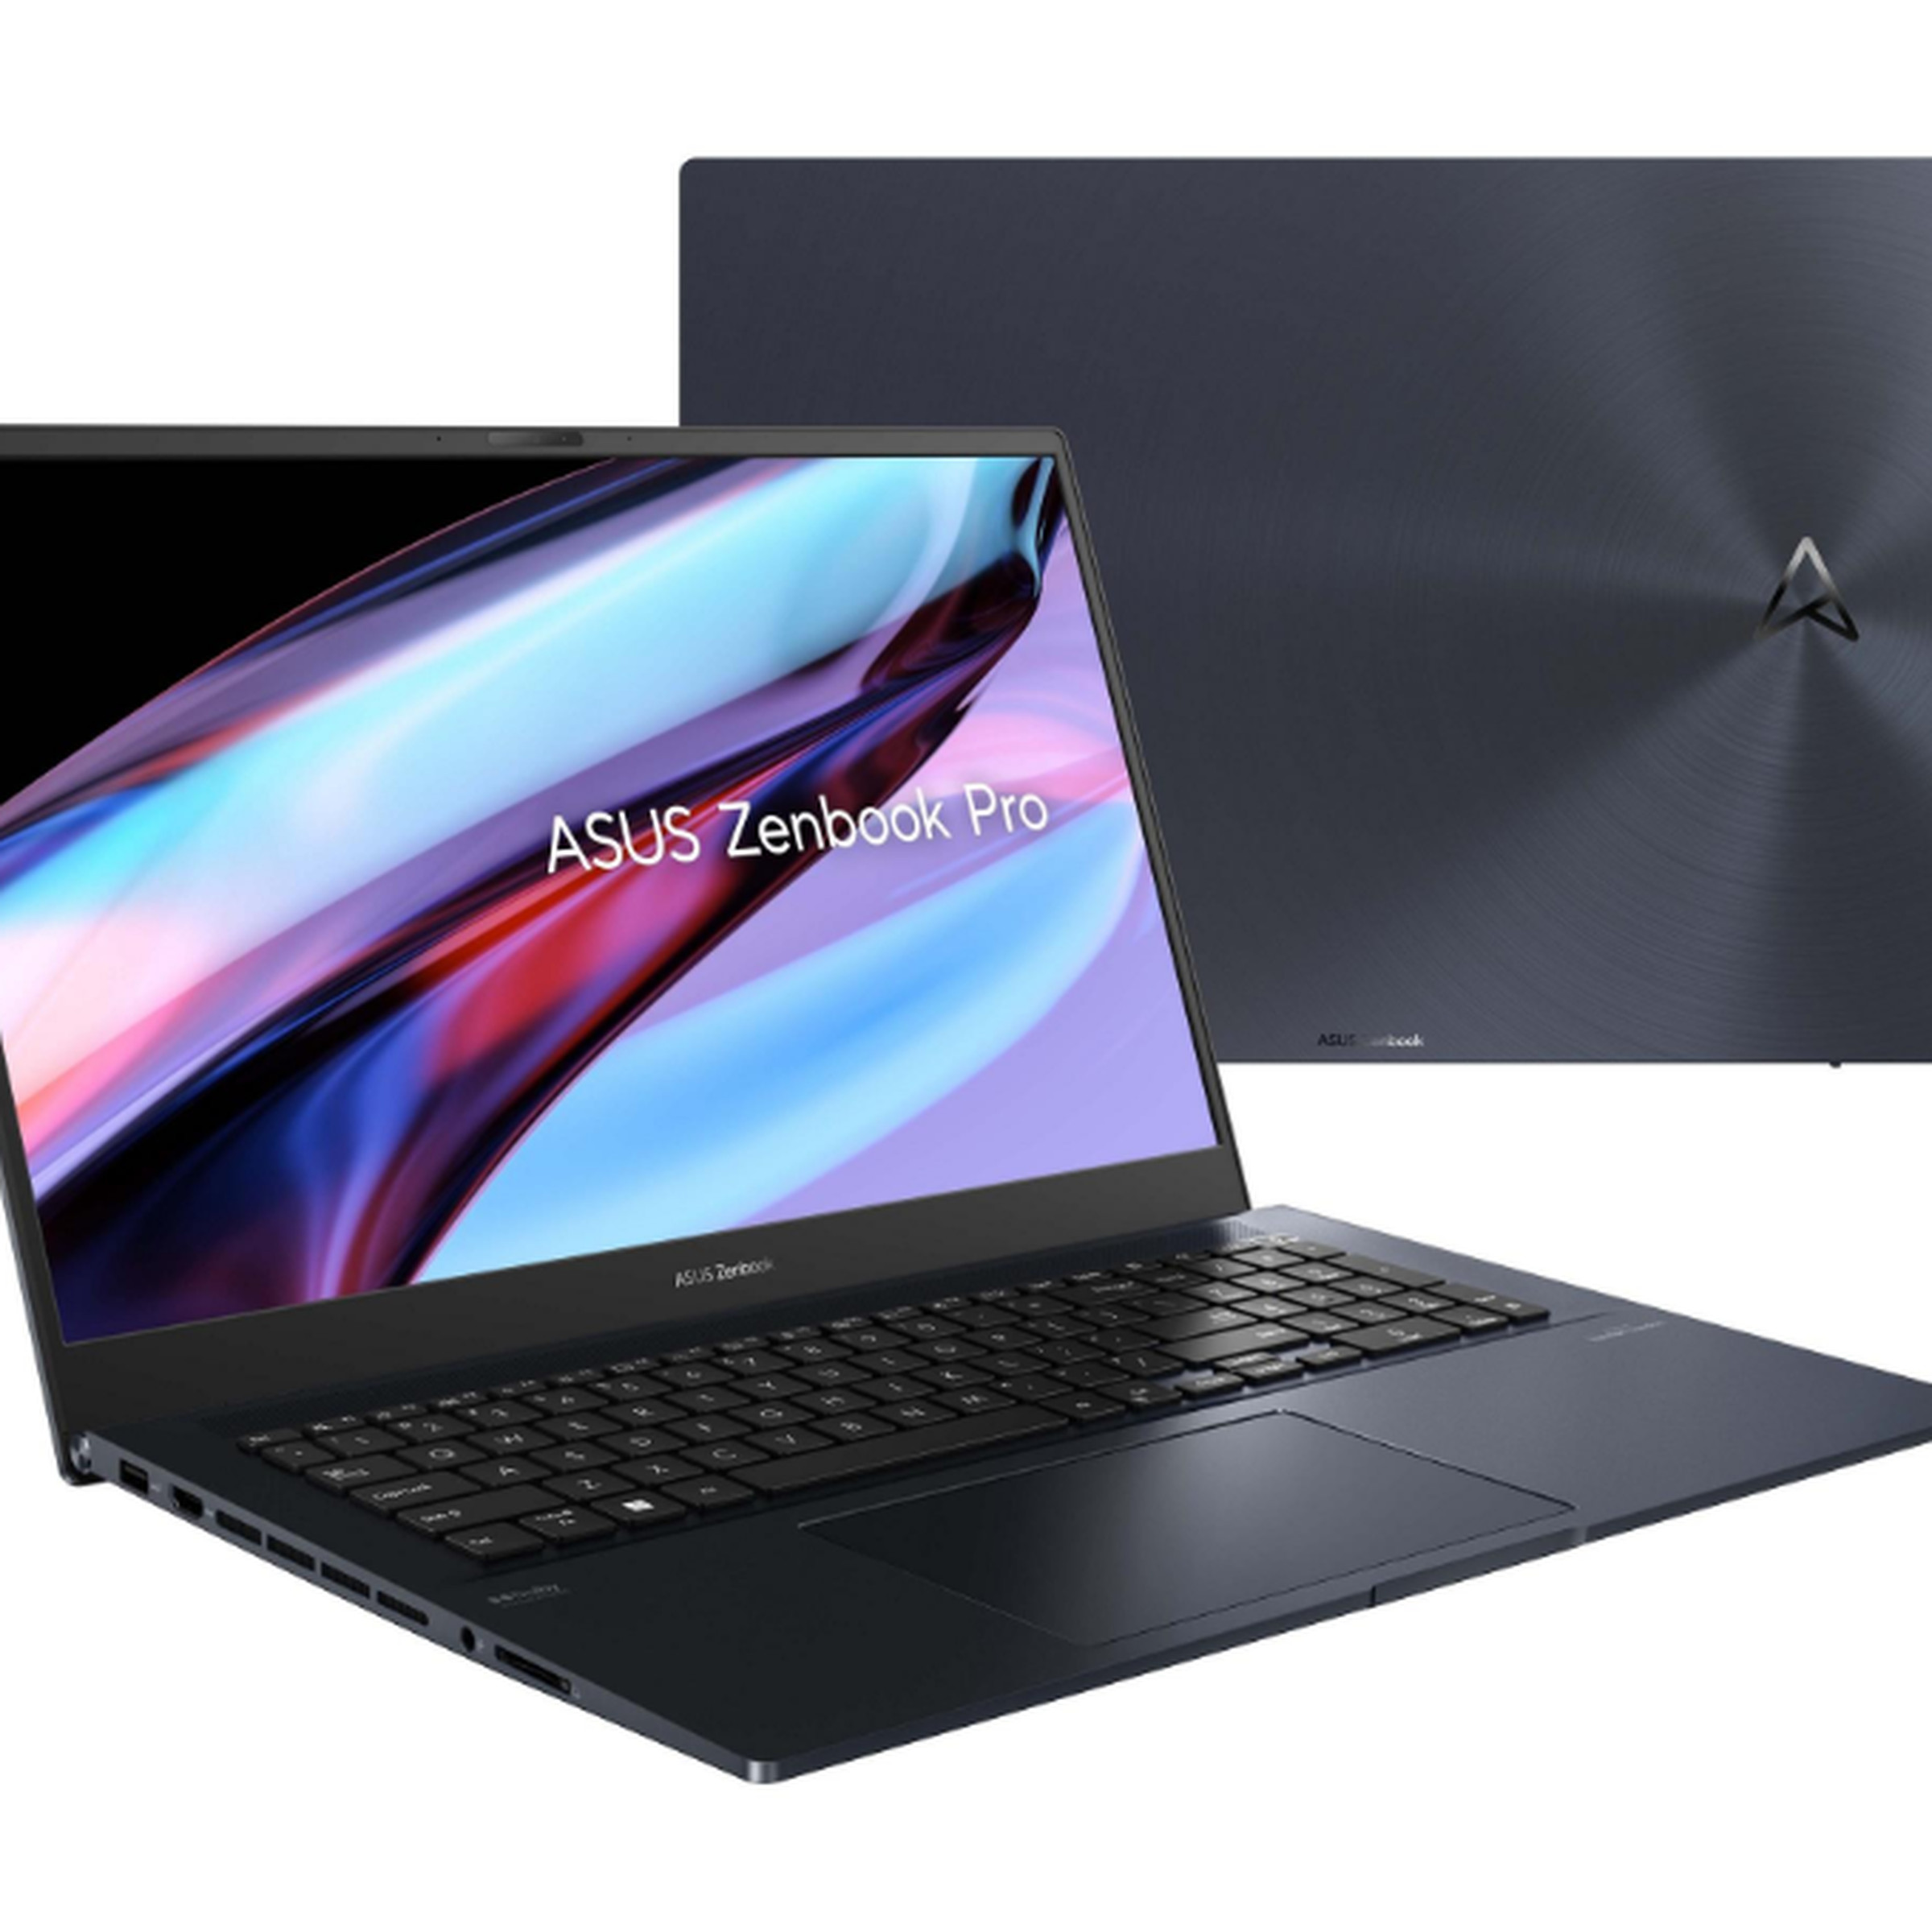 Two Asus Zenbook Pro 17 models on a white background, one open, one closed with the lid facing the camera.